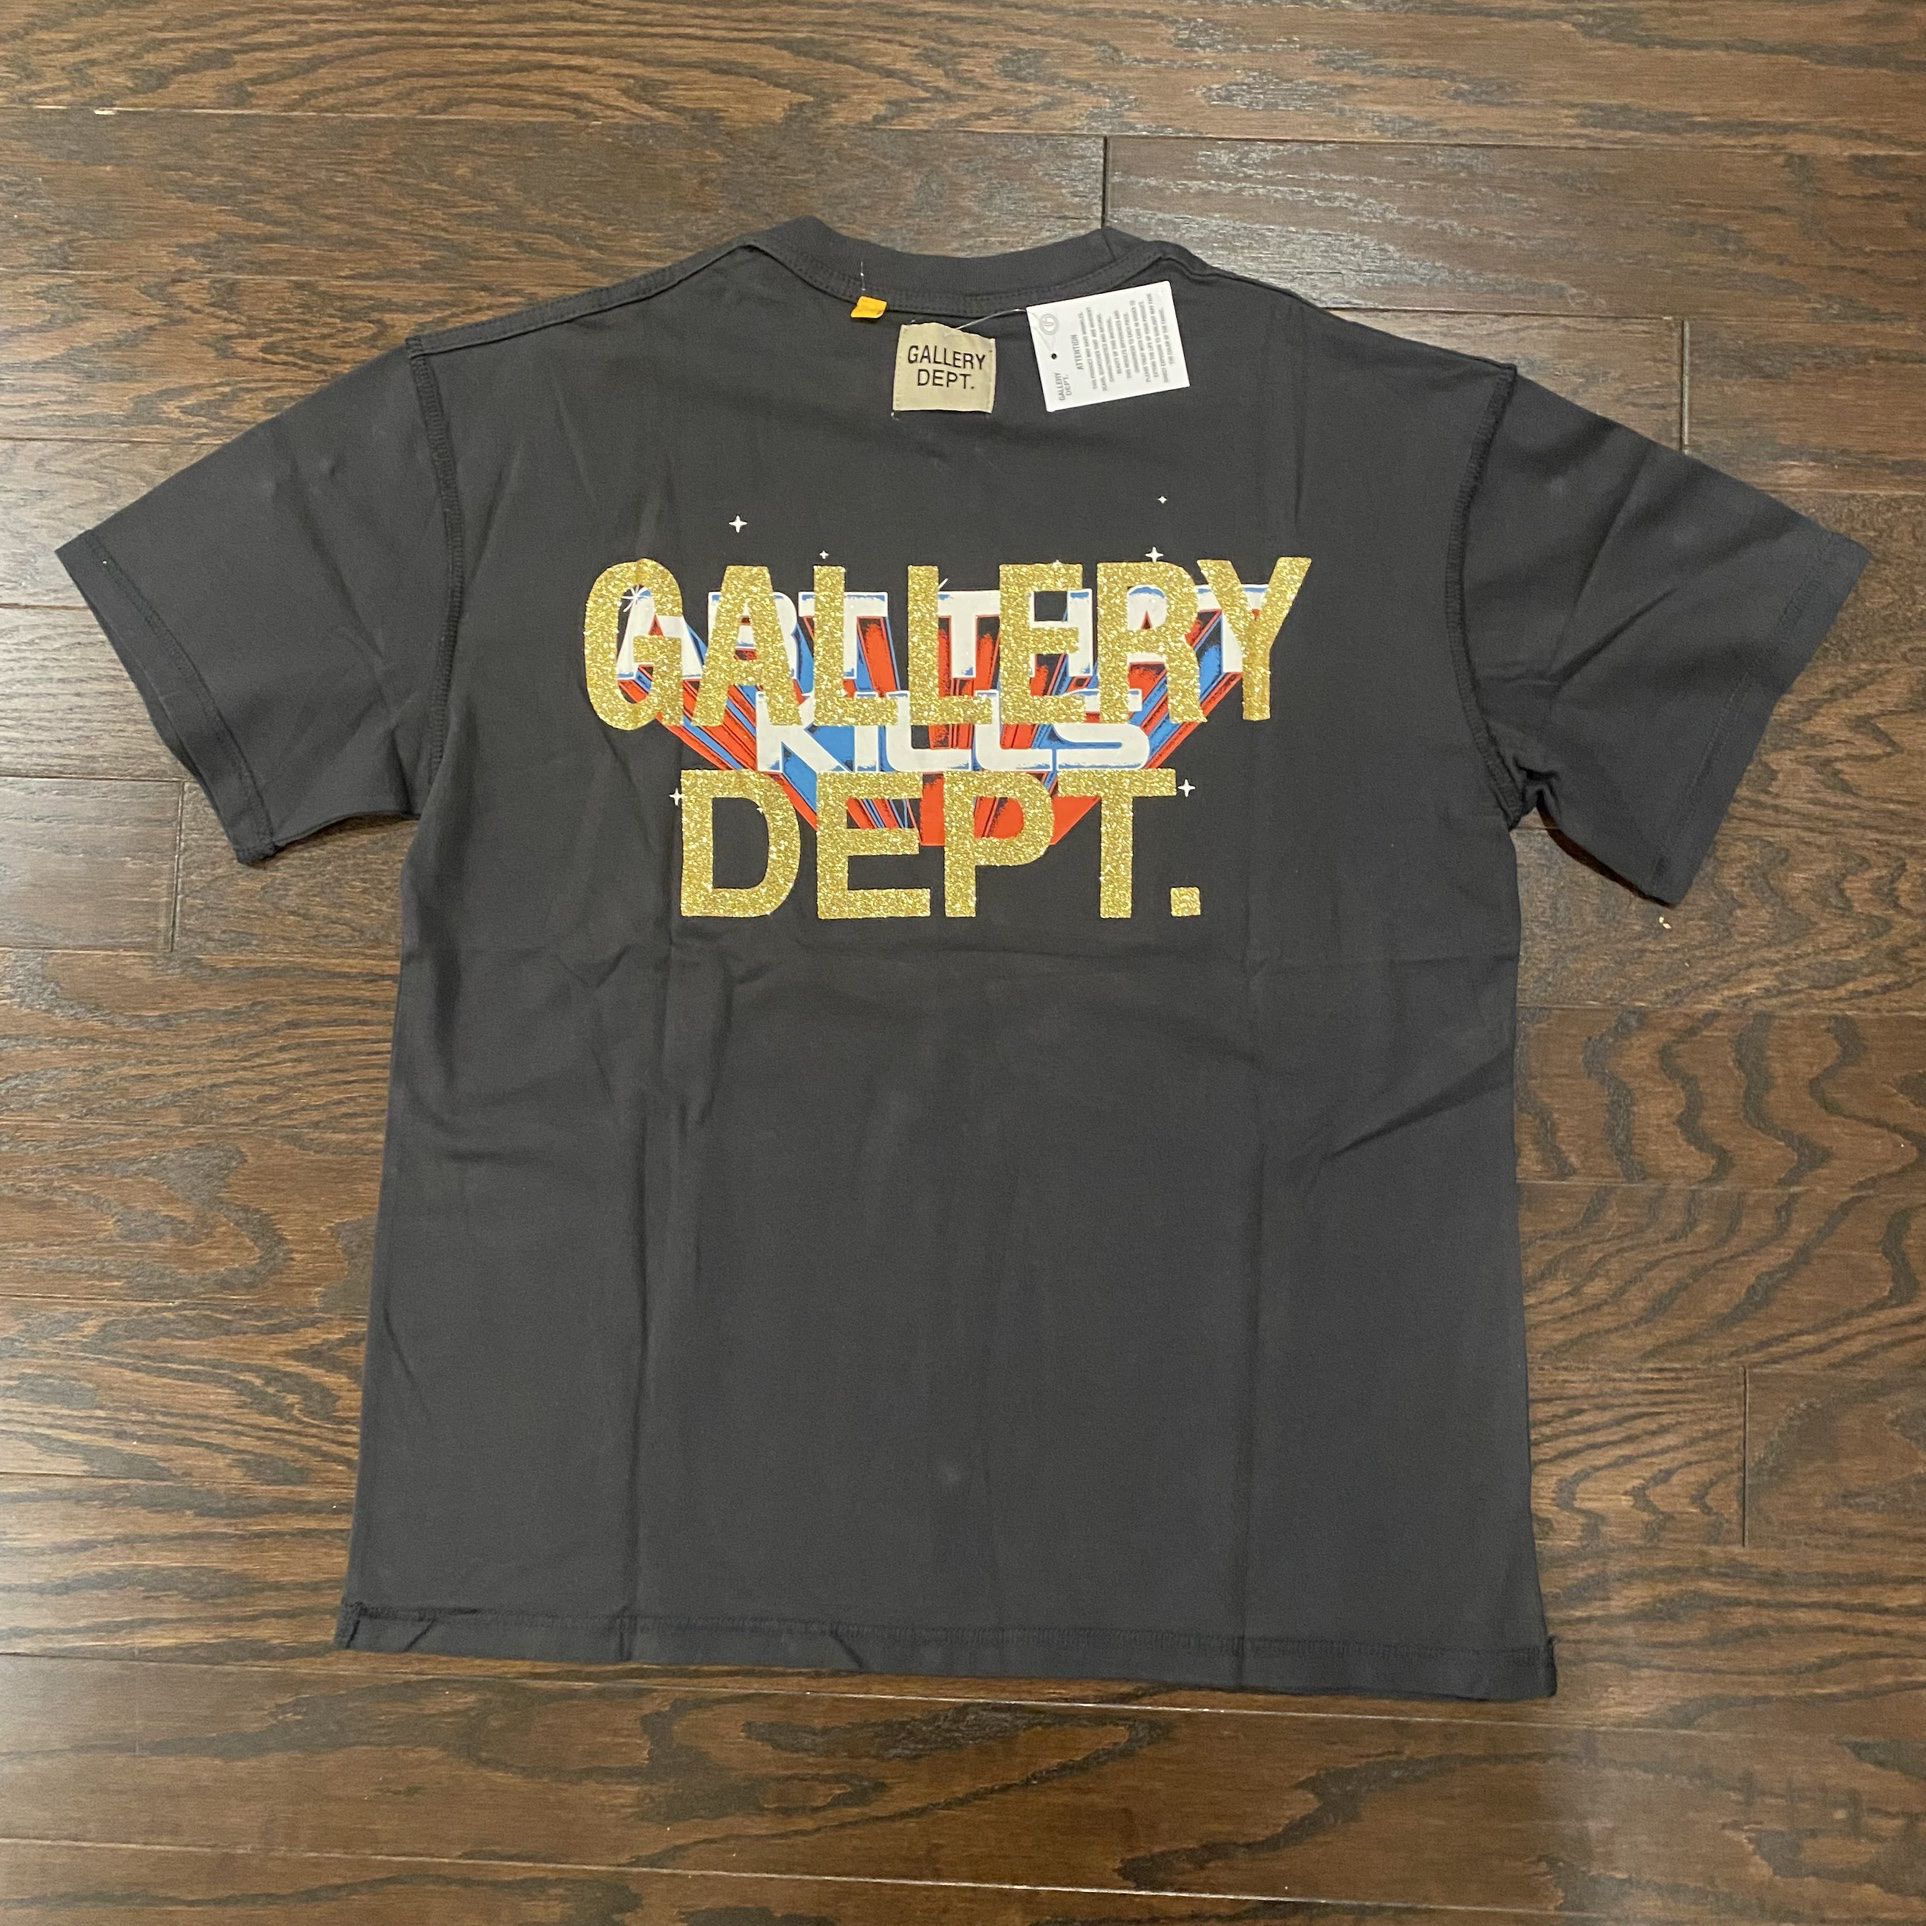 Gallery Dept Art That Kills Inside Out tee for Sale in Rose Valley